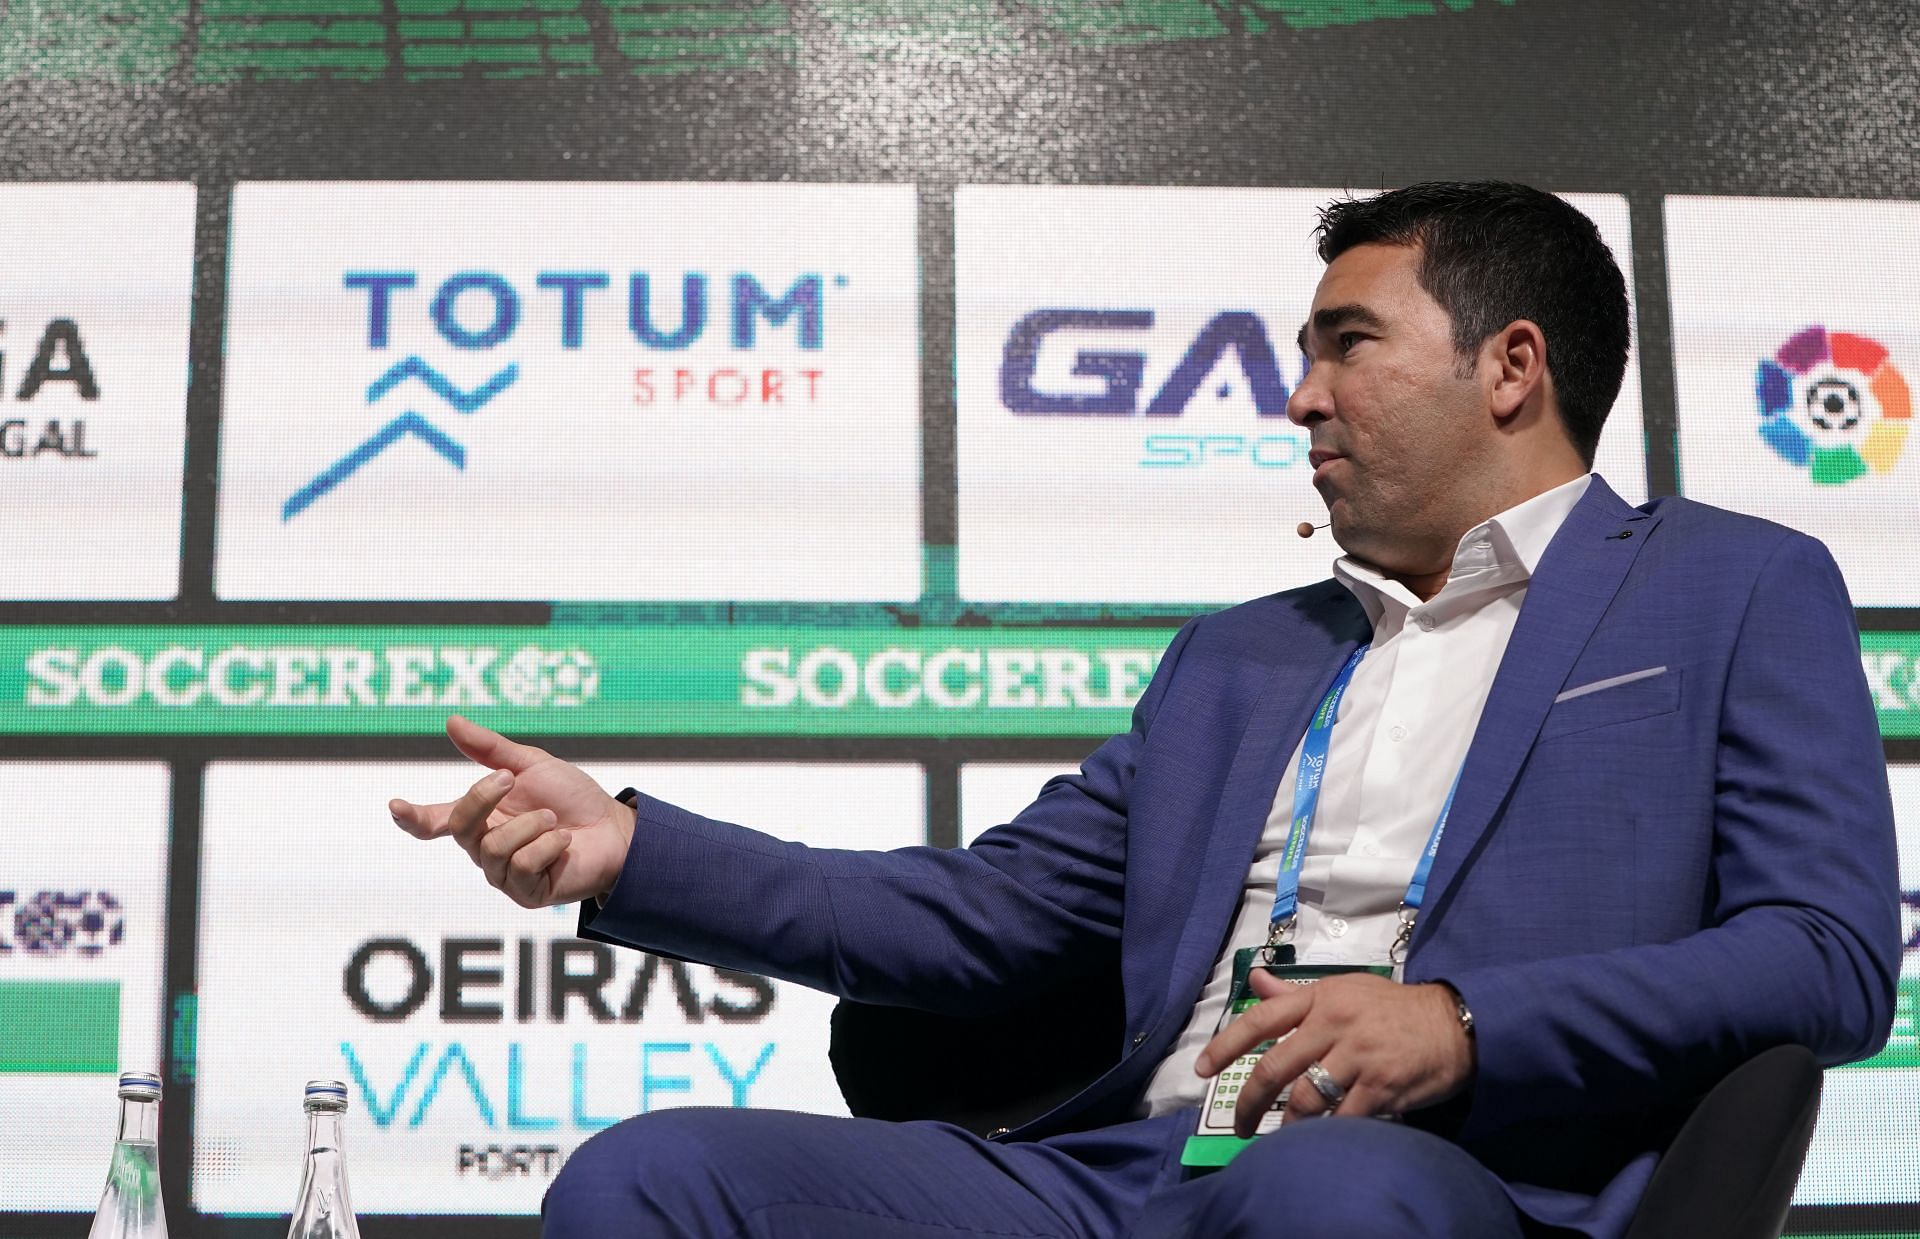 Soccerex Europe - Day 1